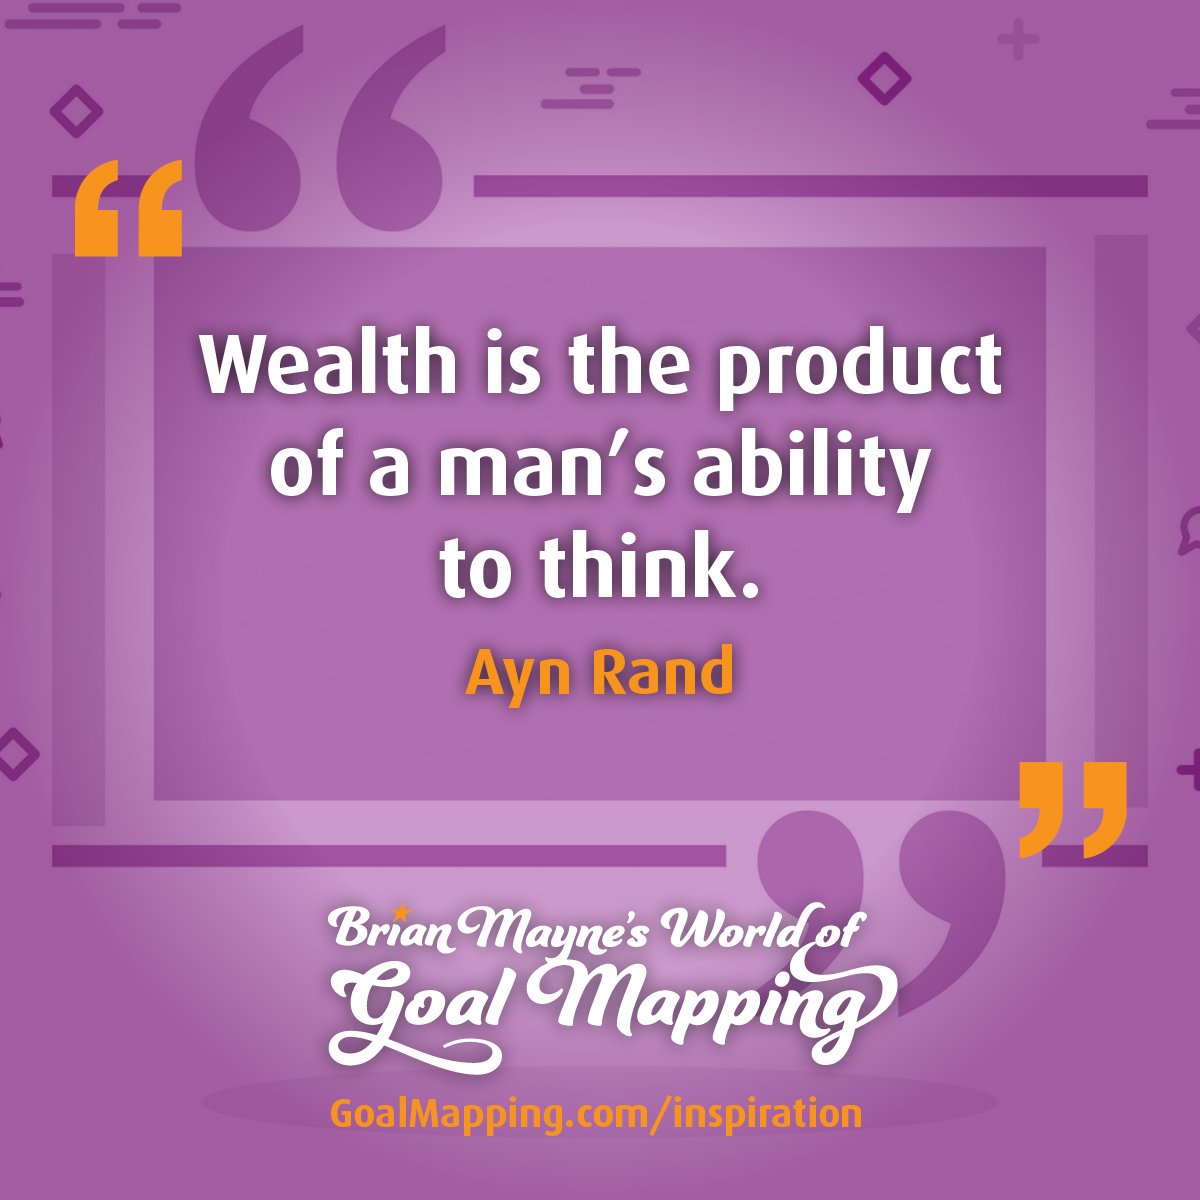 "Wealth is the product of a man’s ability to think." Ayn Rand